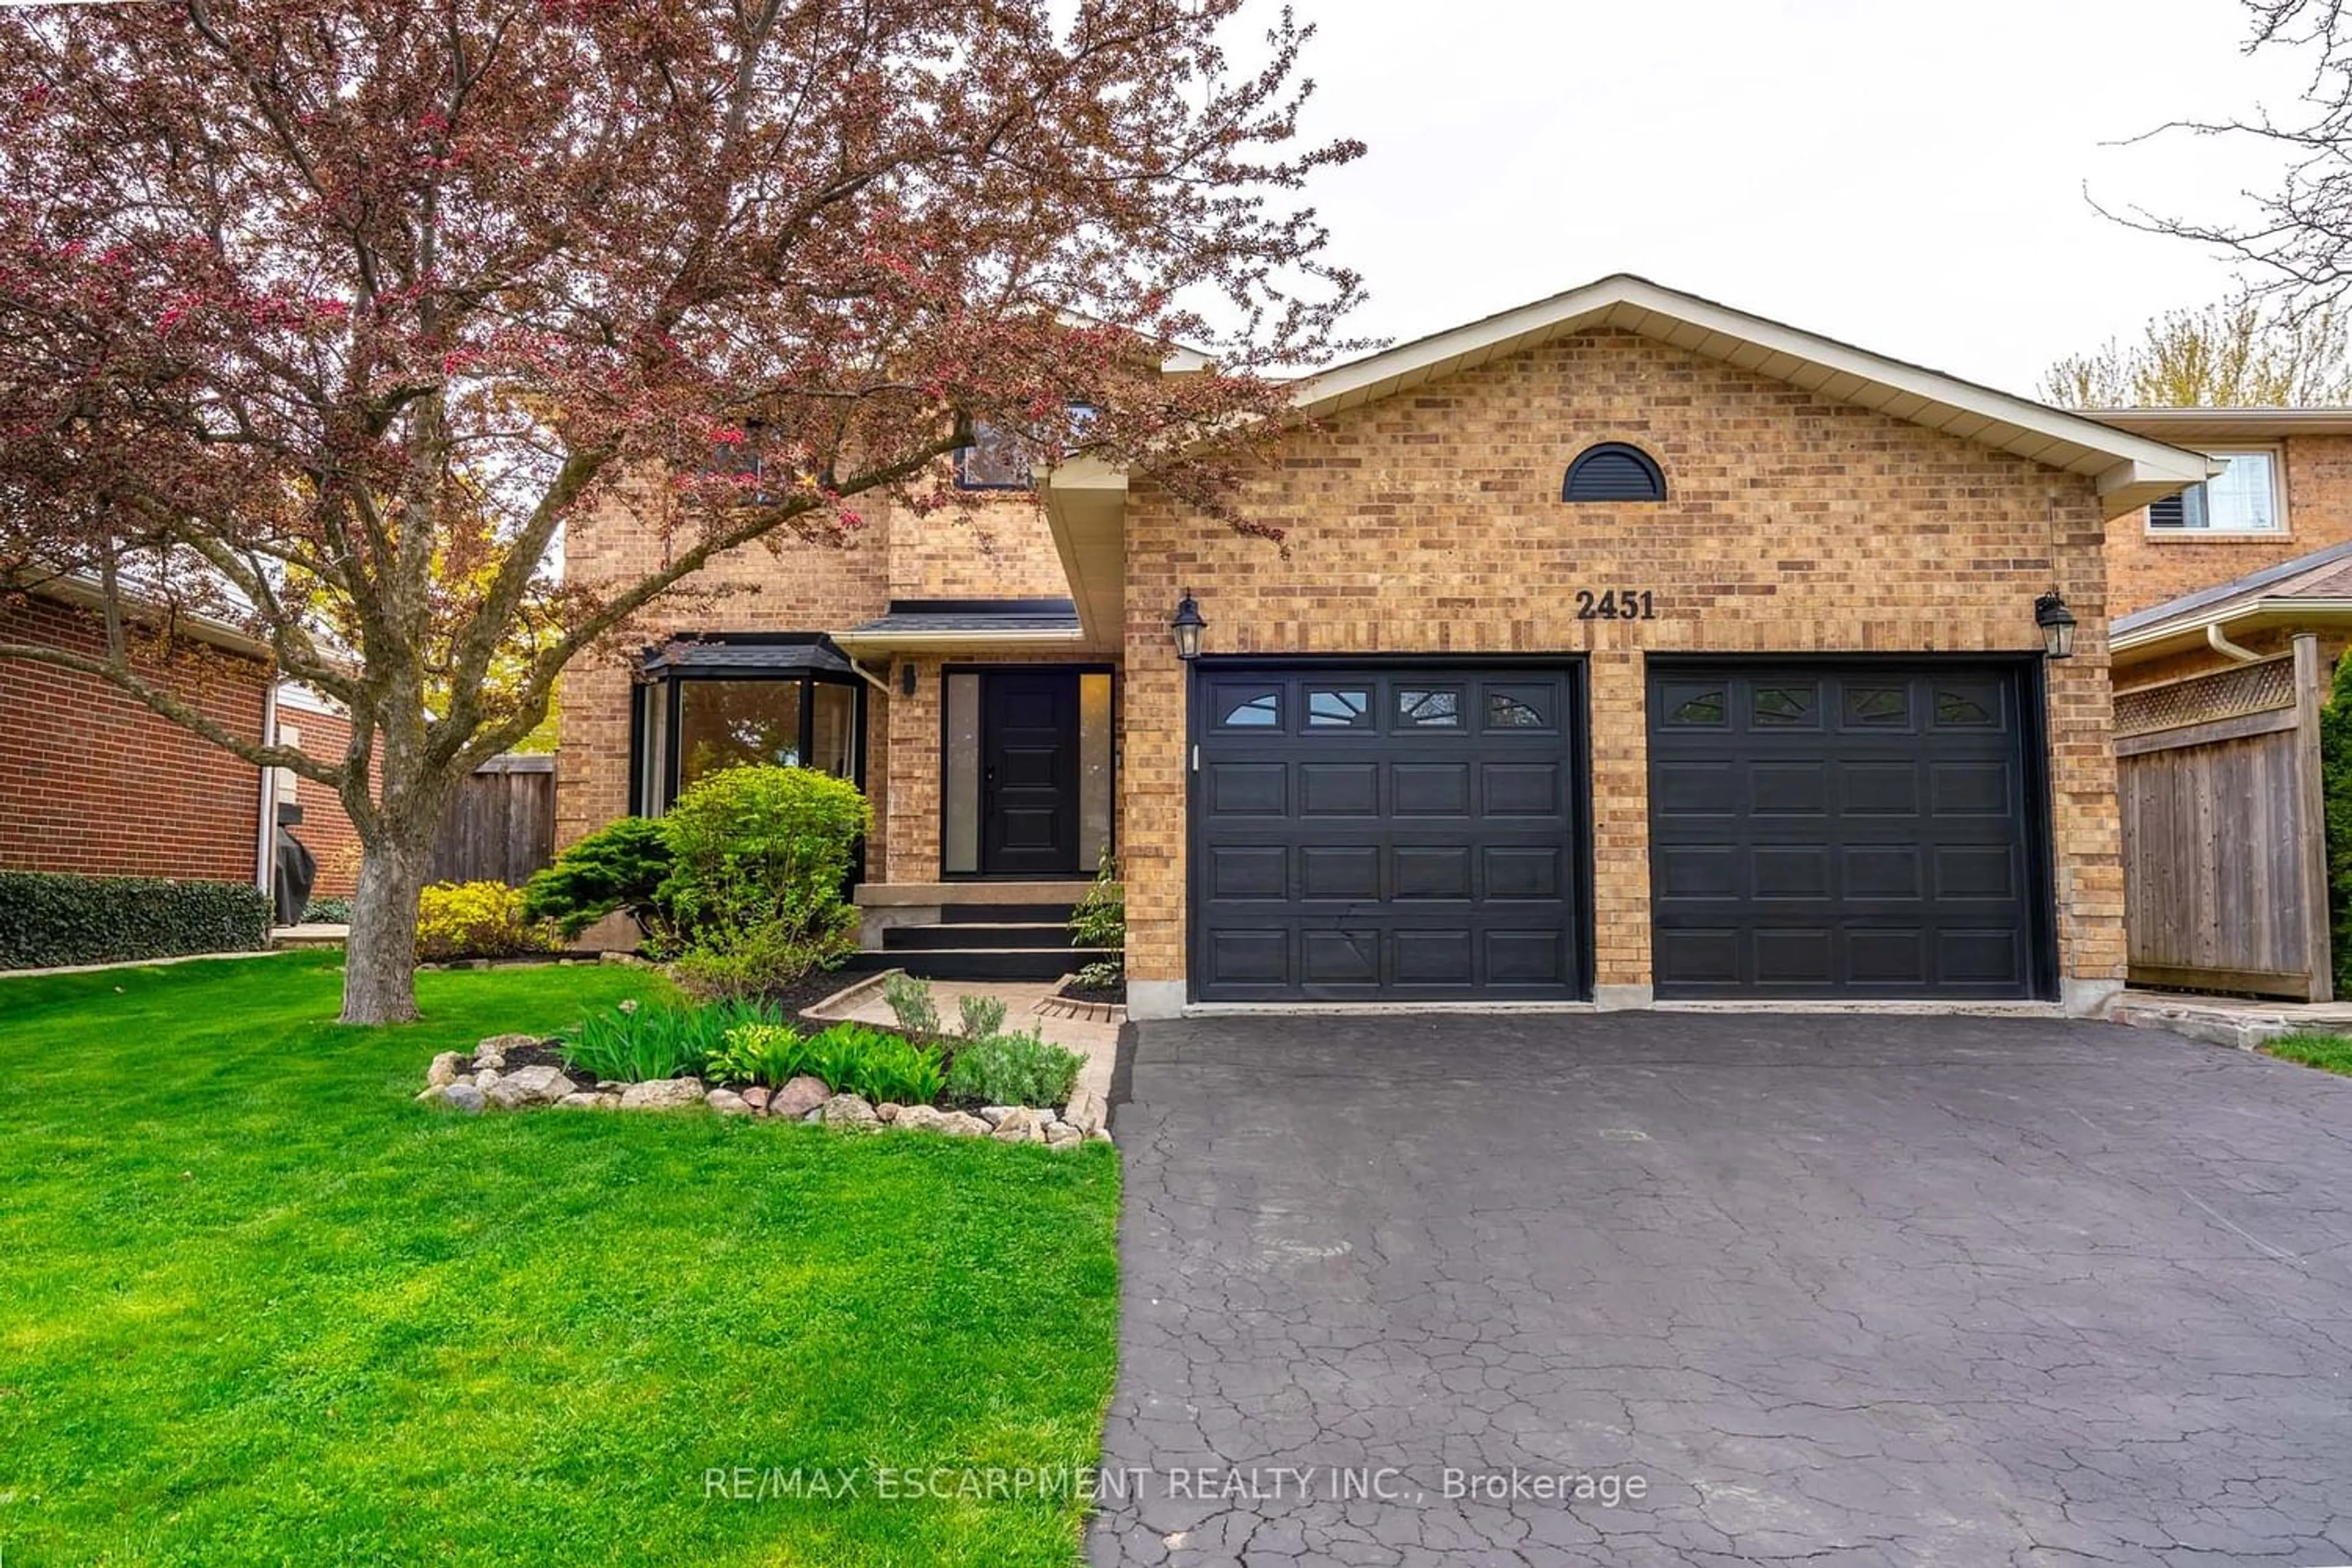 Home with brick exterior material for 2451 Overton Dr, Burlington Ontario L7P 4B6